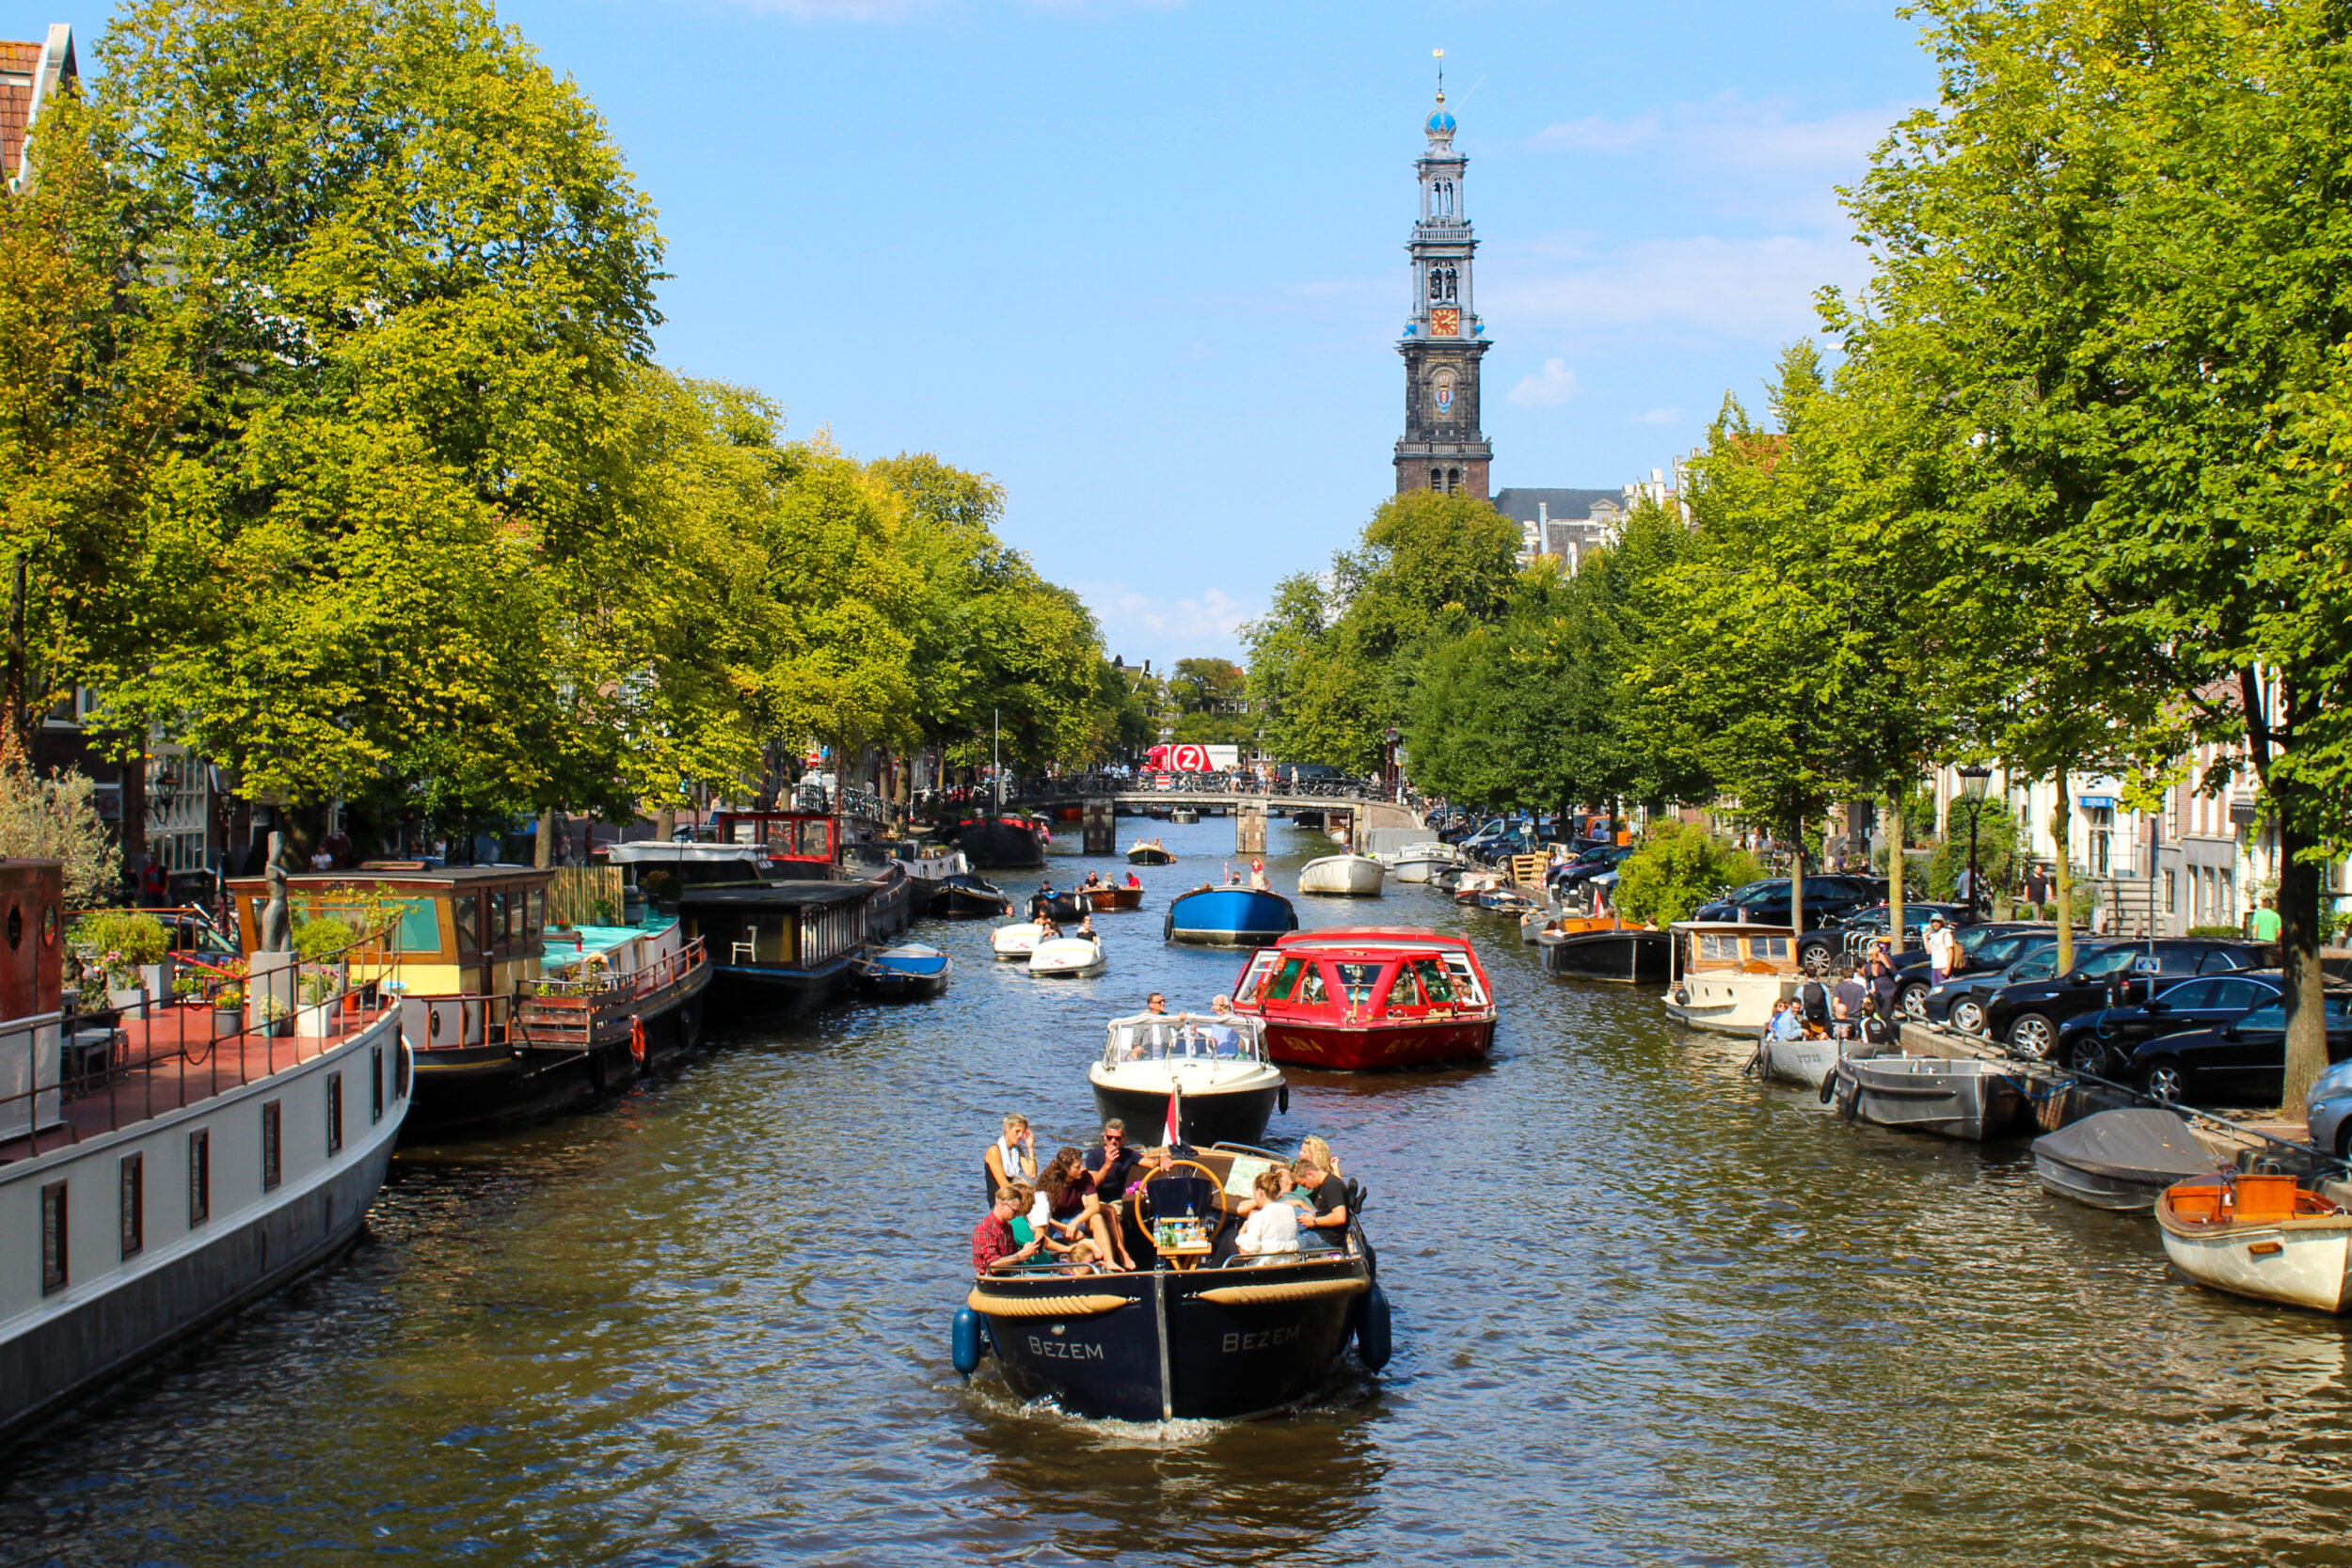 The ESC Congress 2023 took place in Amsterdam